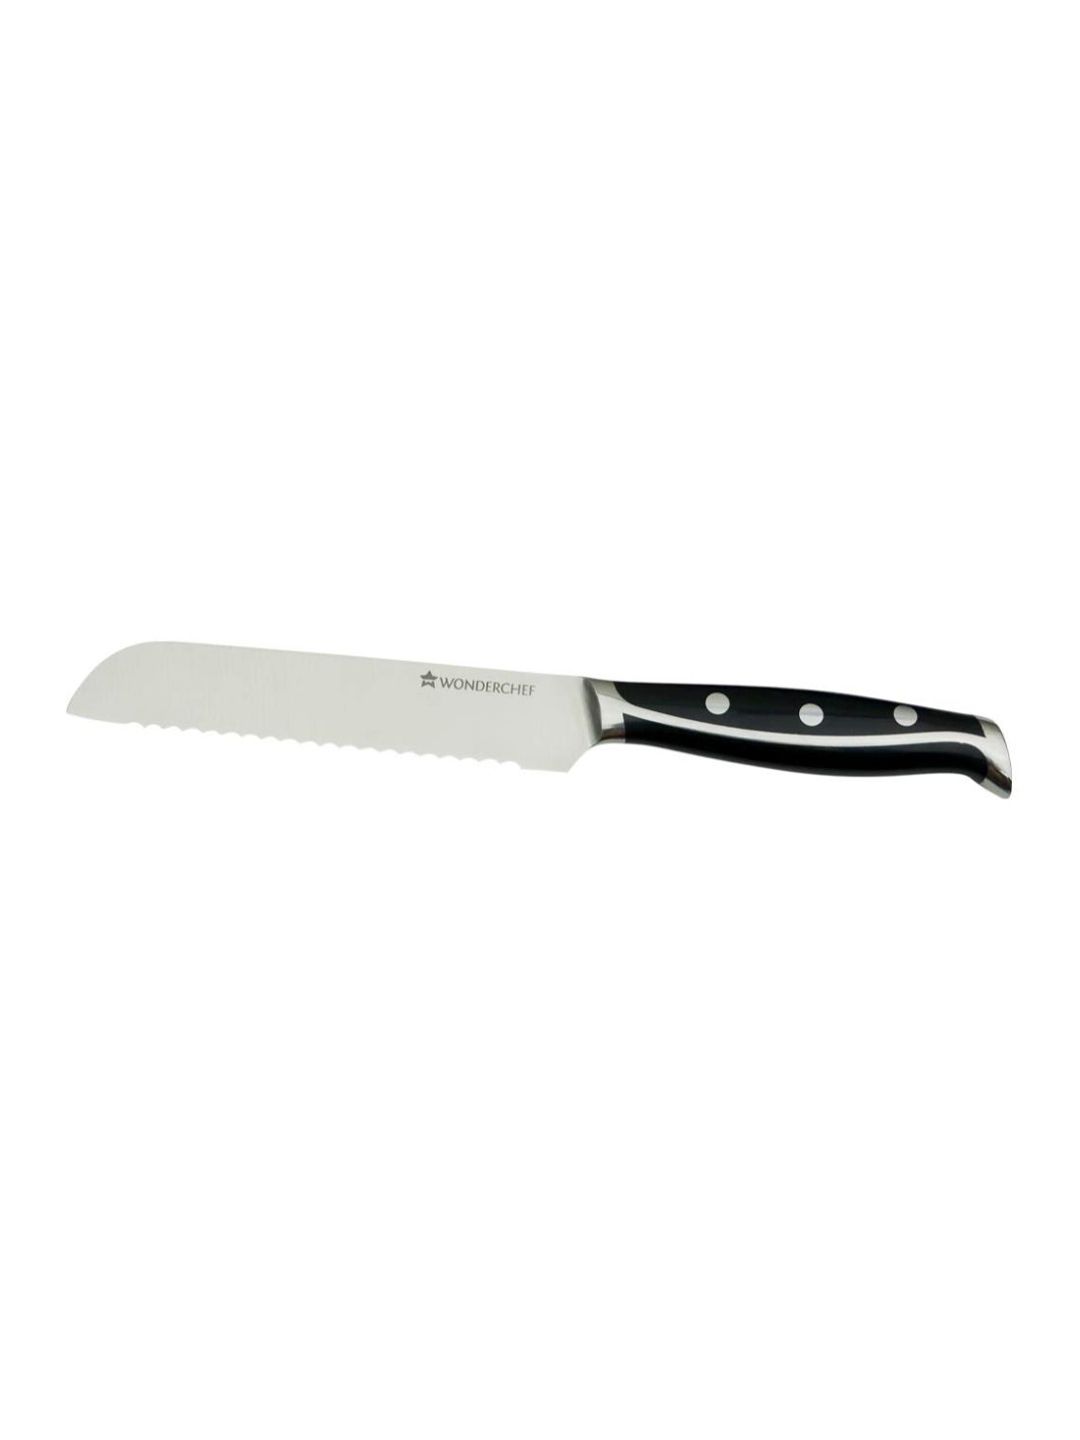 Wonderchef Silver & Black Solid Stainless Steel Bread Knife Price in India